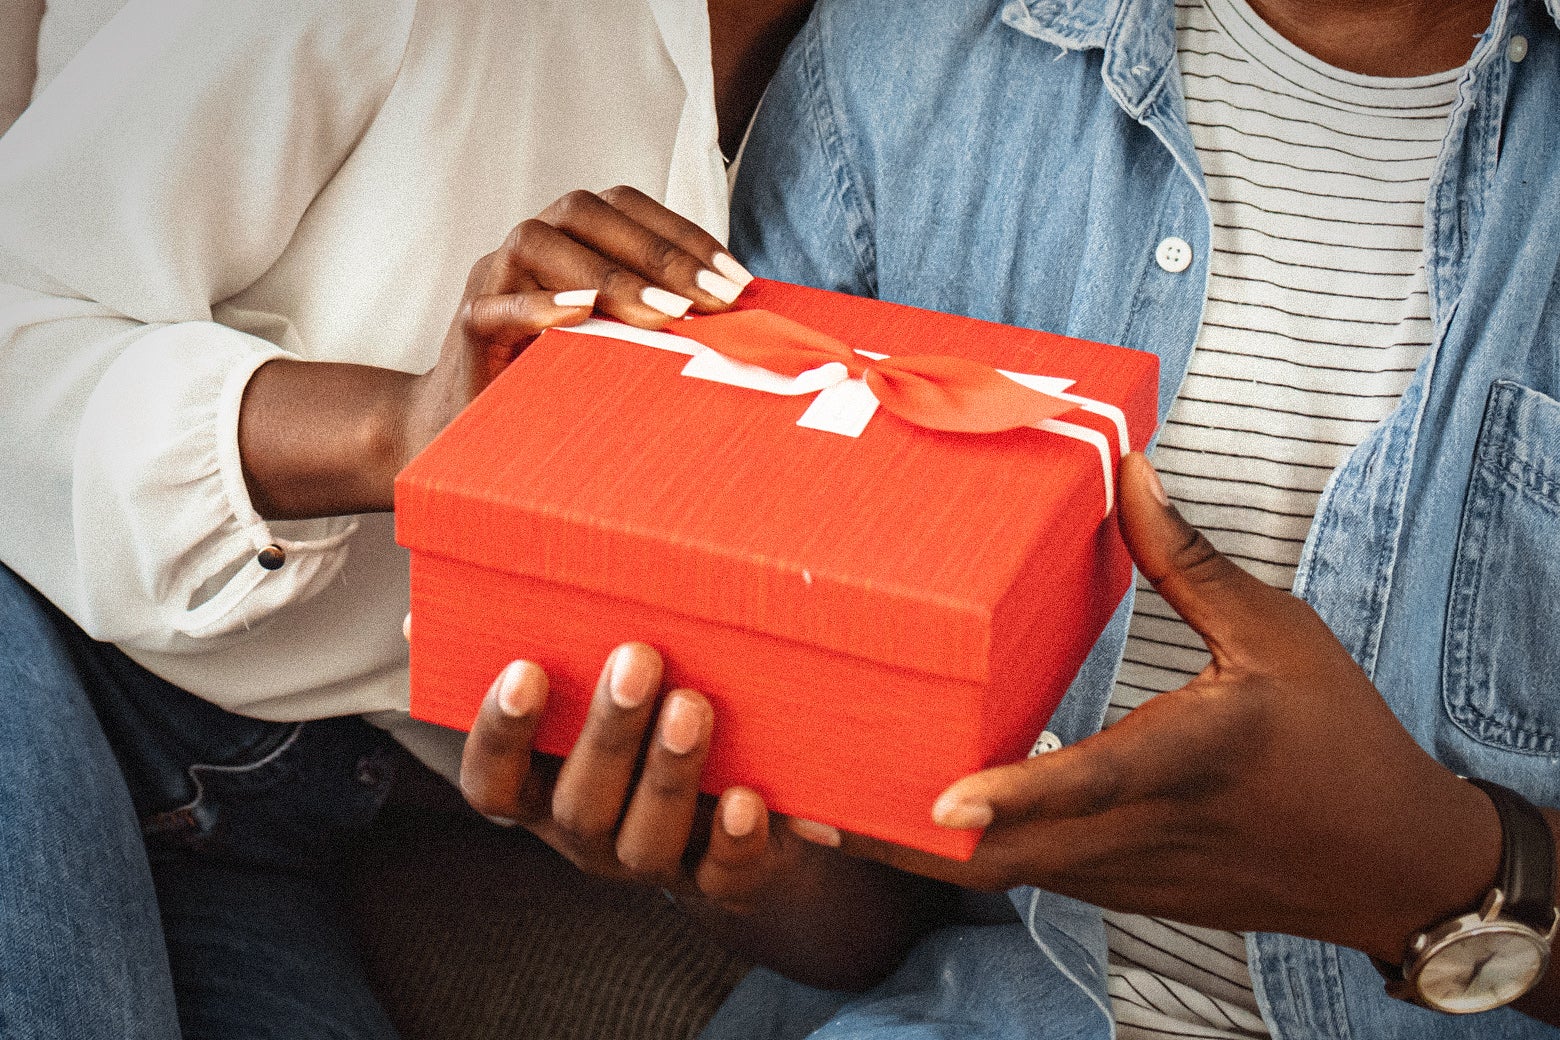 19 Must-See Couples Christmas Gifts for Christmas 2023